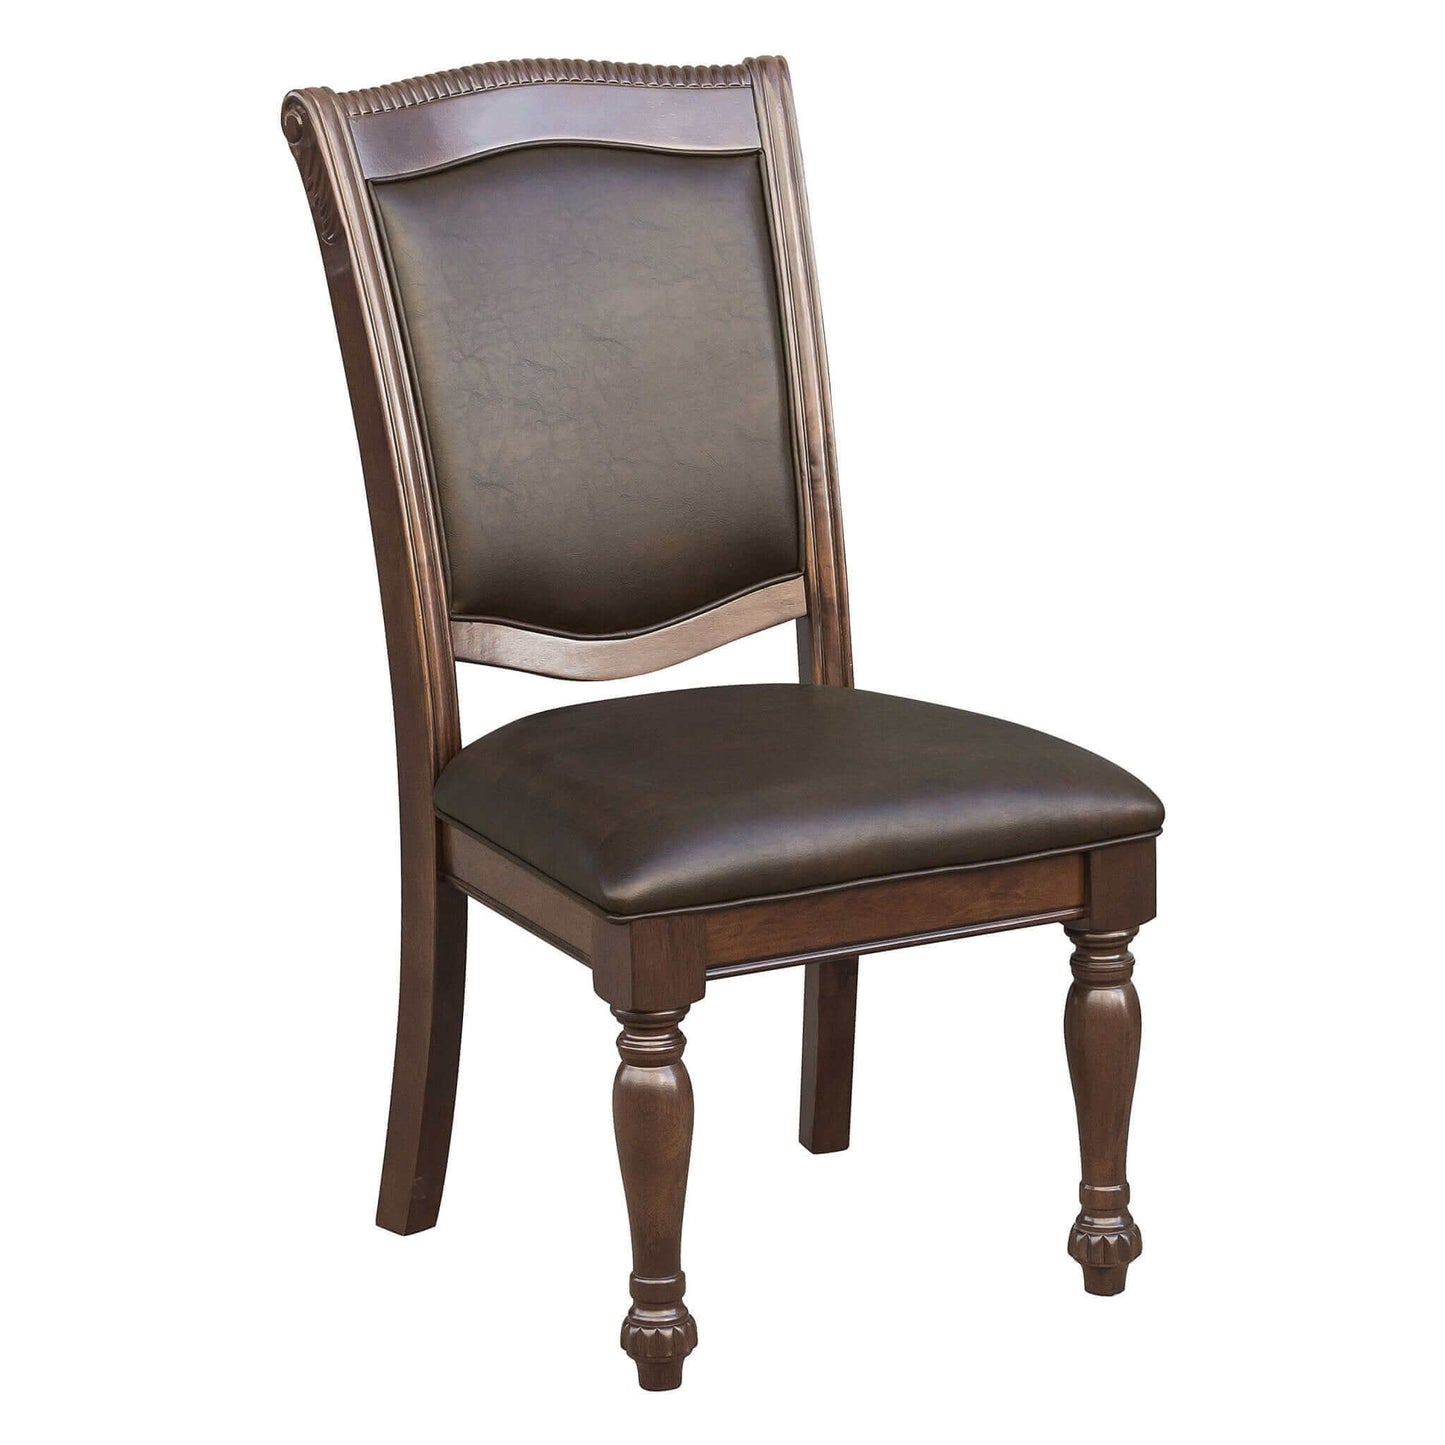 Traditional style dining chair with brown cherry finish and comfortable seating.